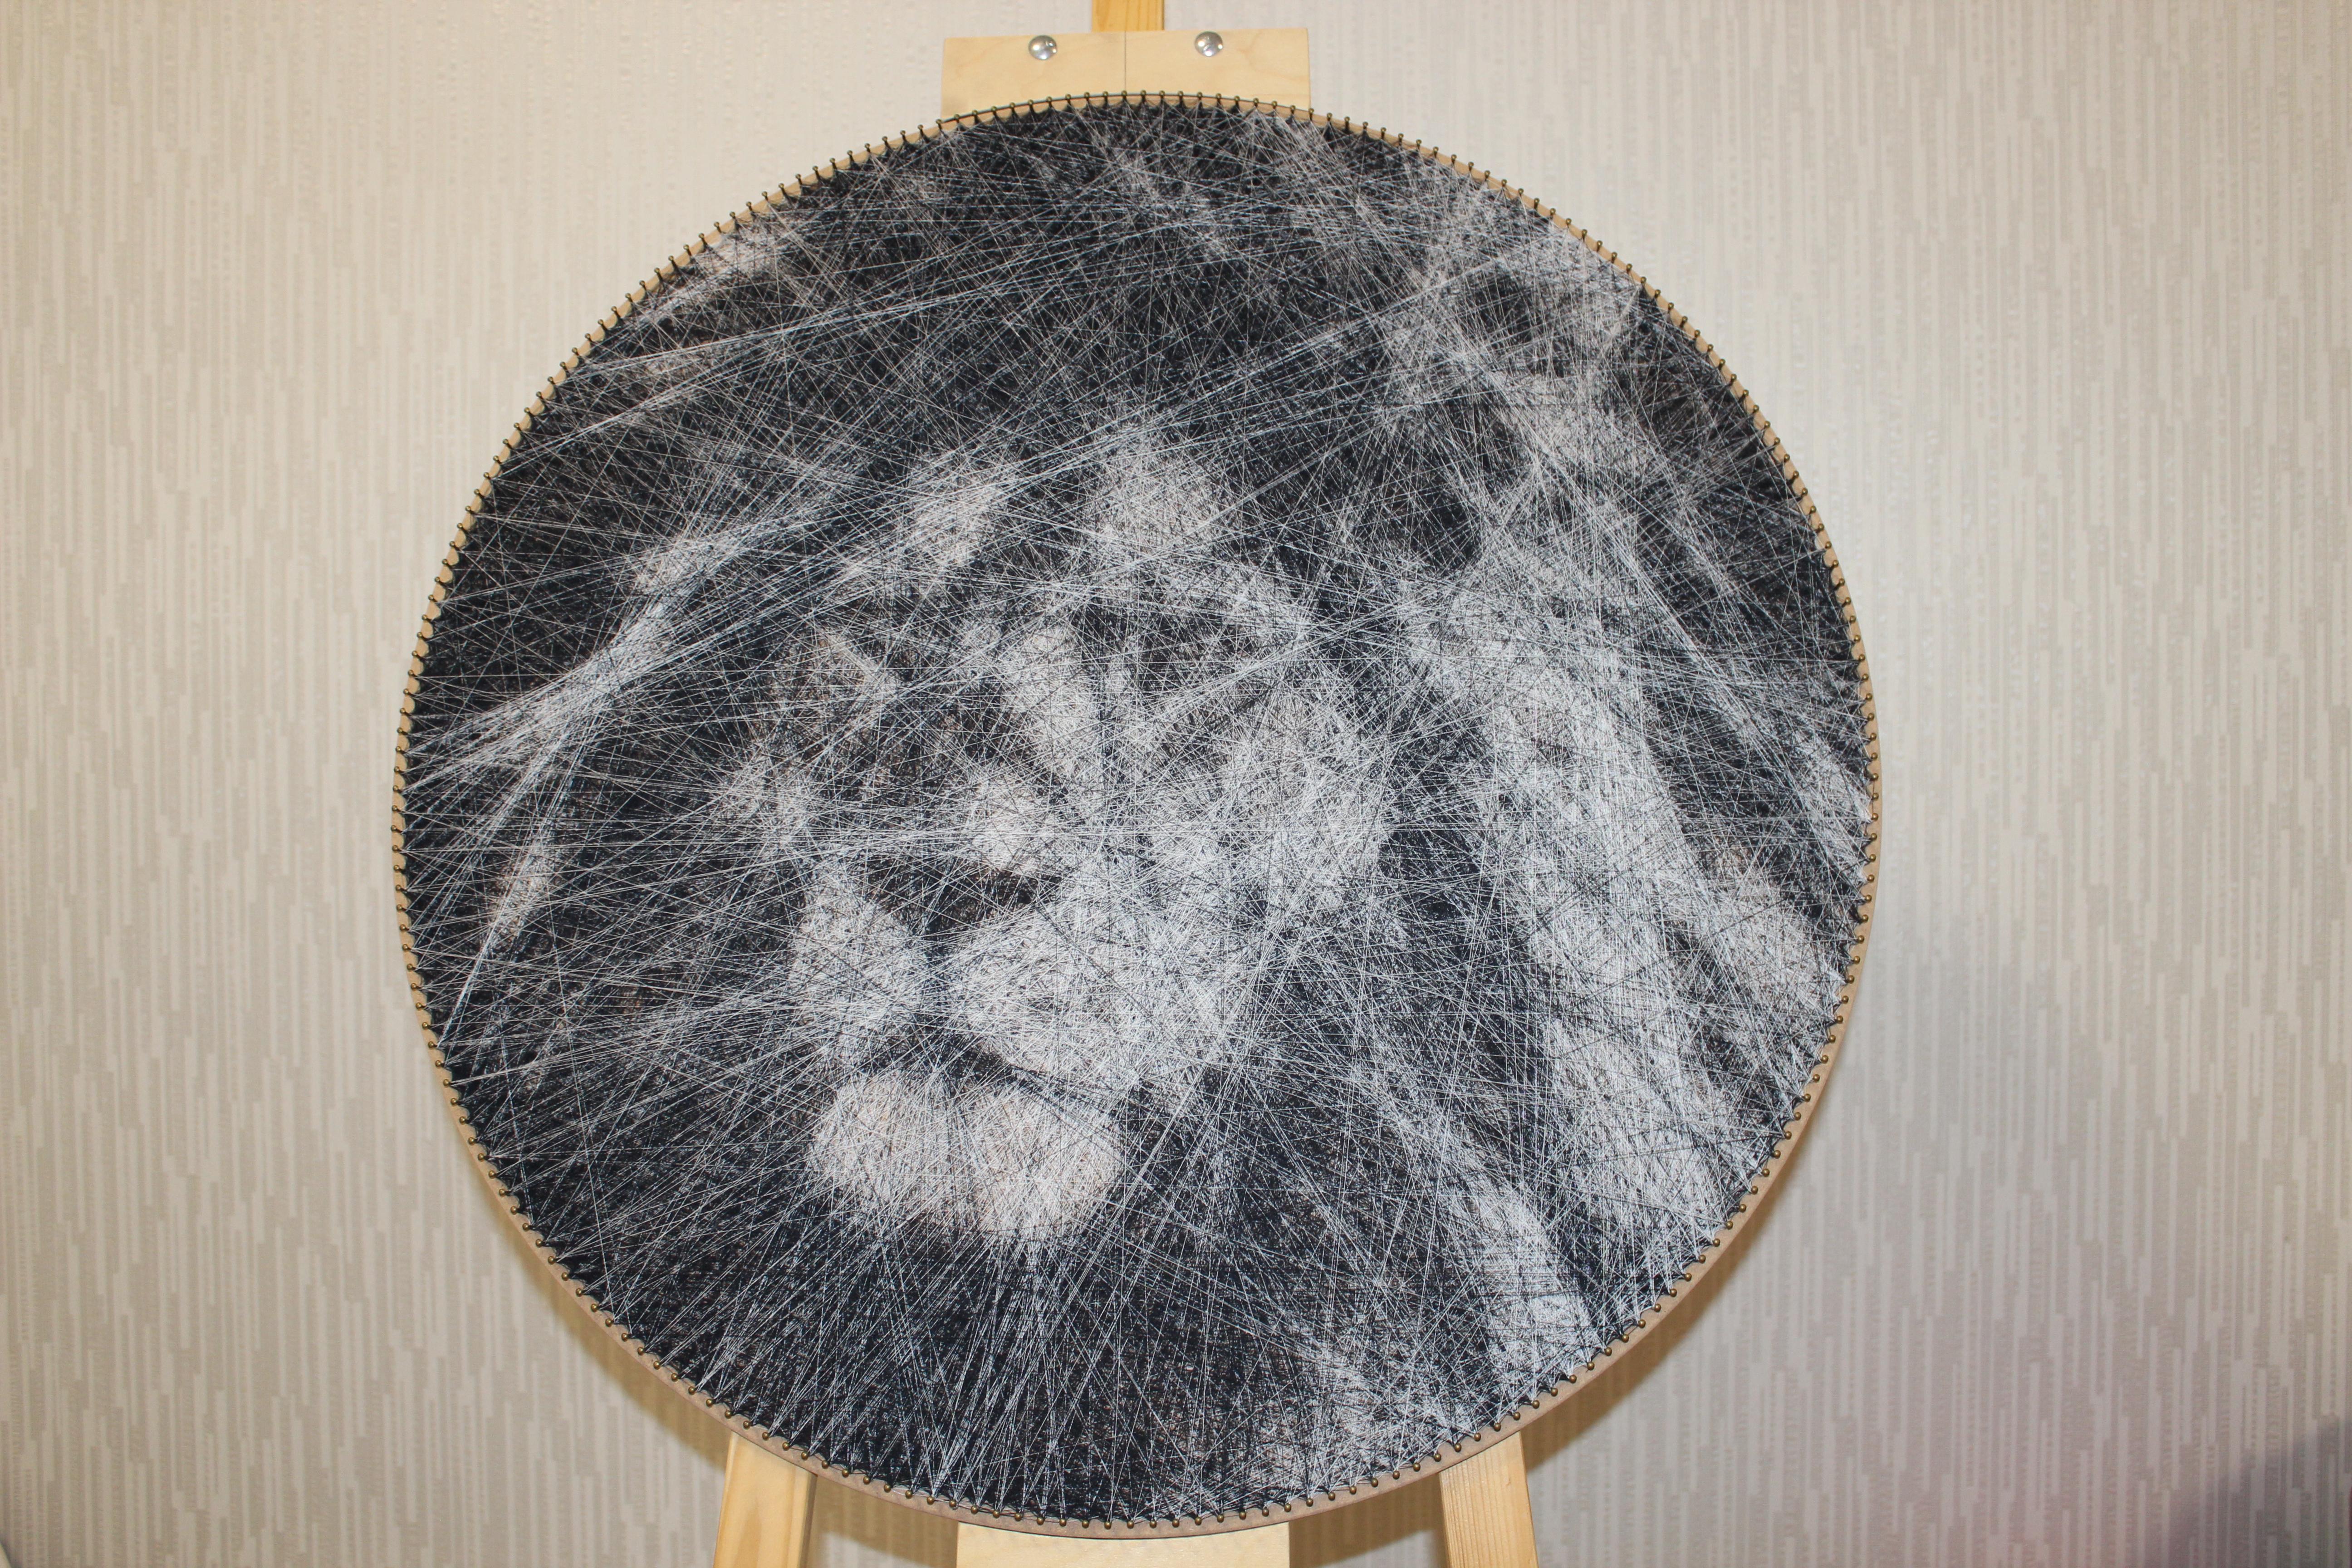 Black and White Lion- Animal 3D unique sculptural piece with thread